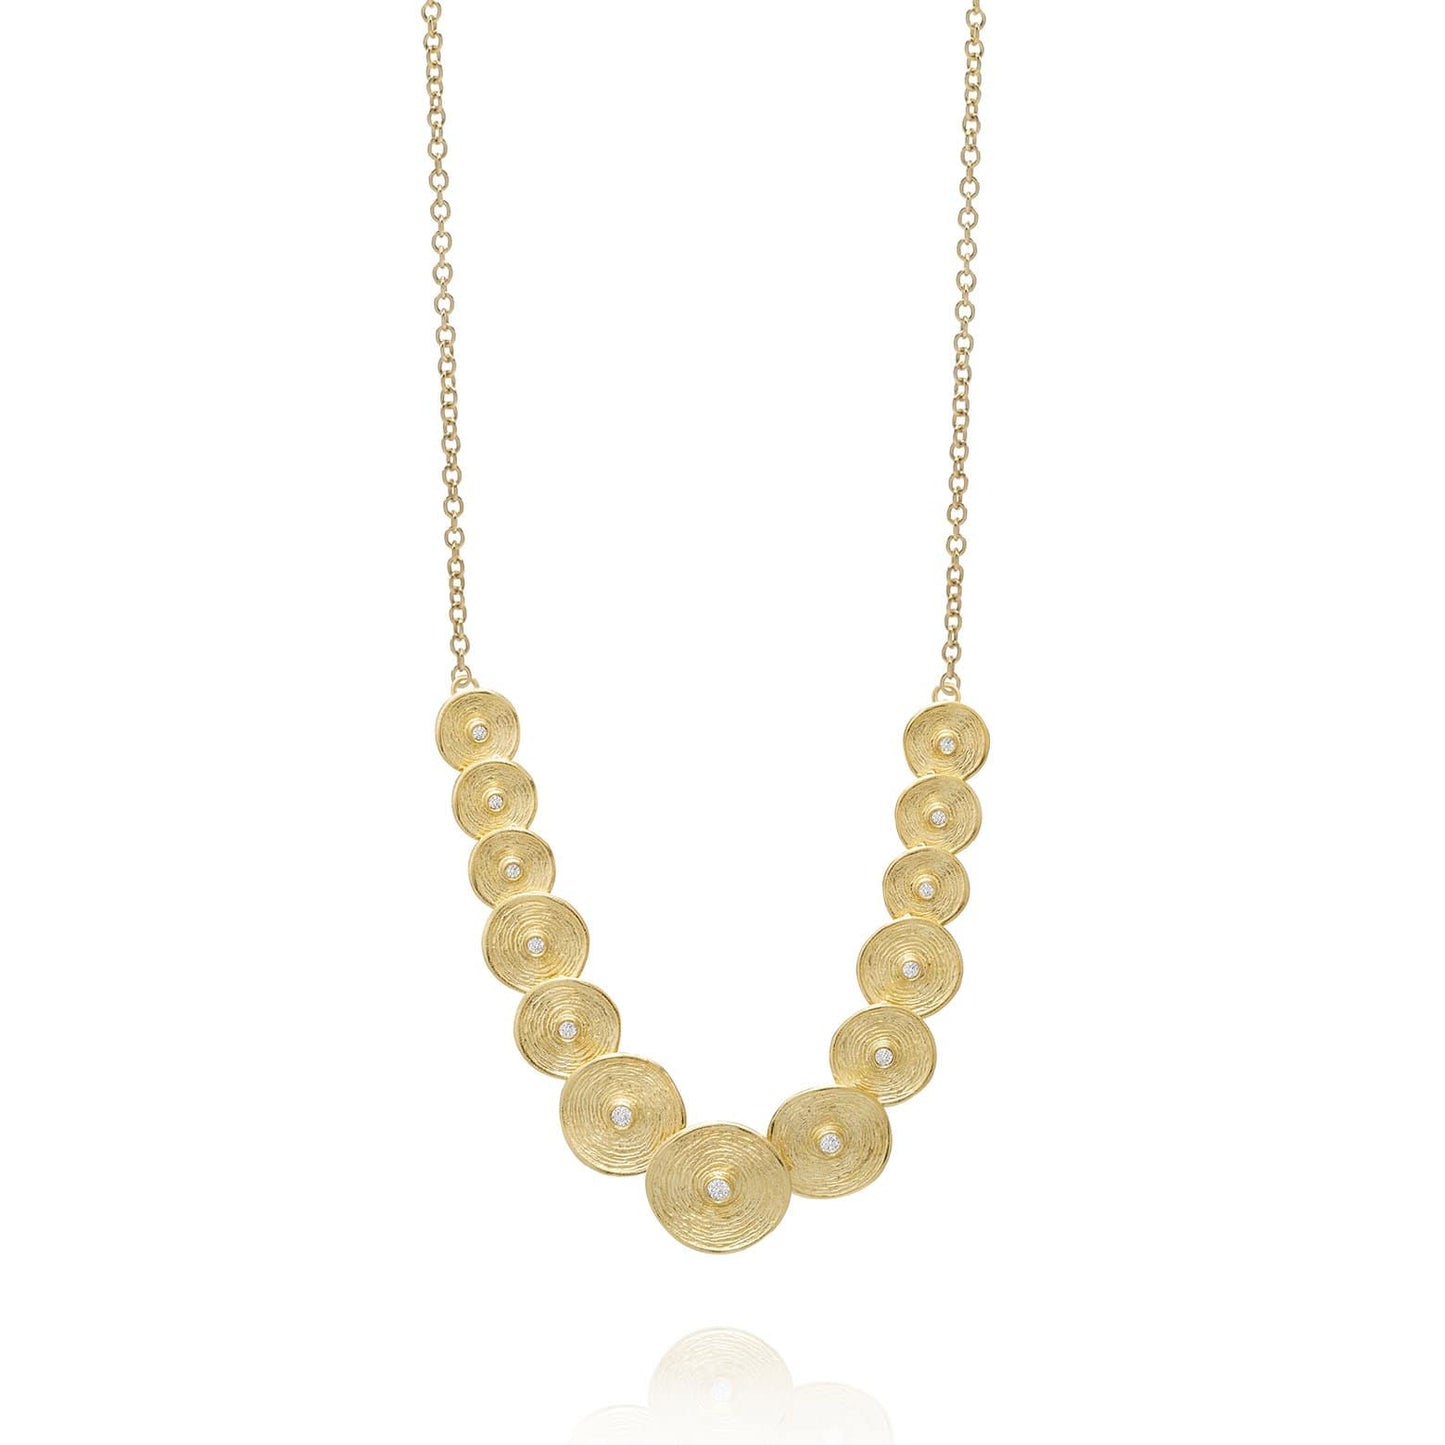 Dalia T Online Necklace Signature Collection 14KT YG & Diamonds Textured Circles Necklace